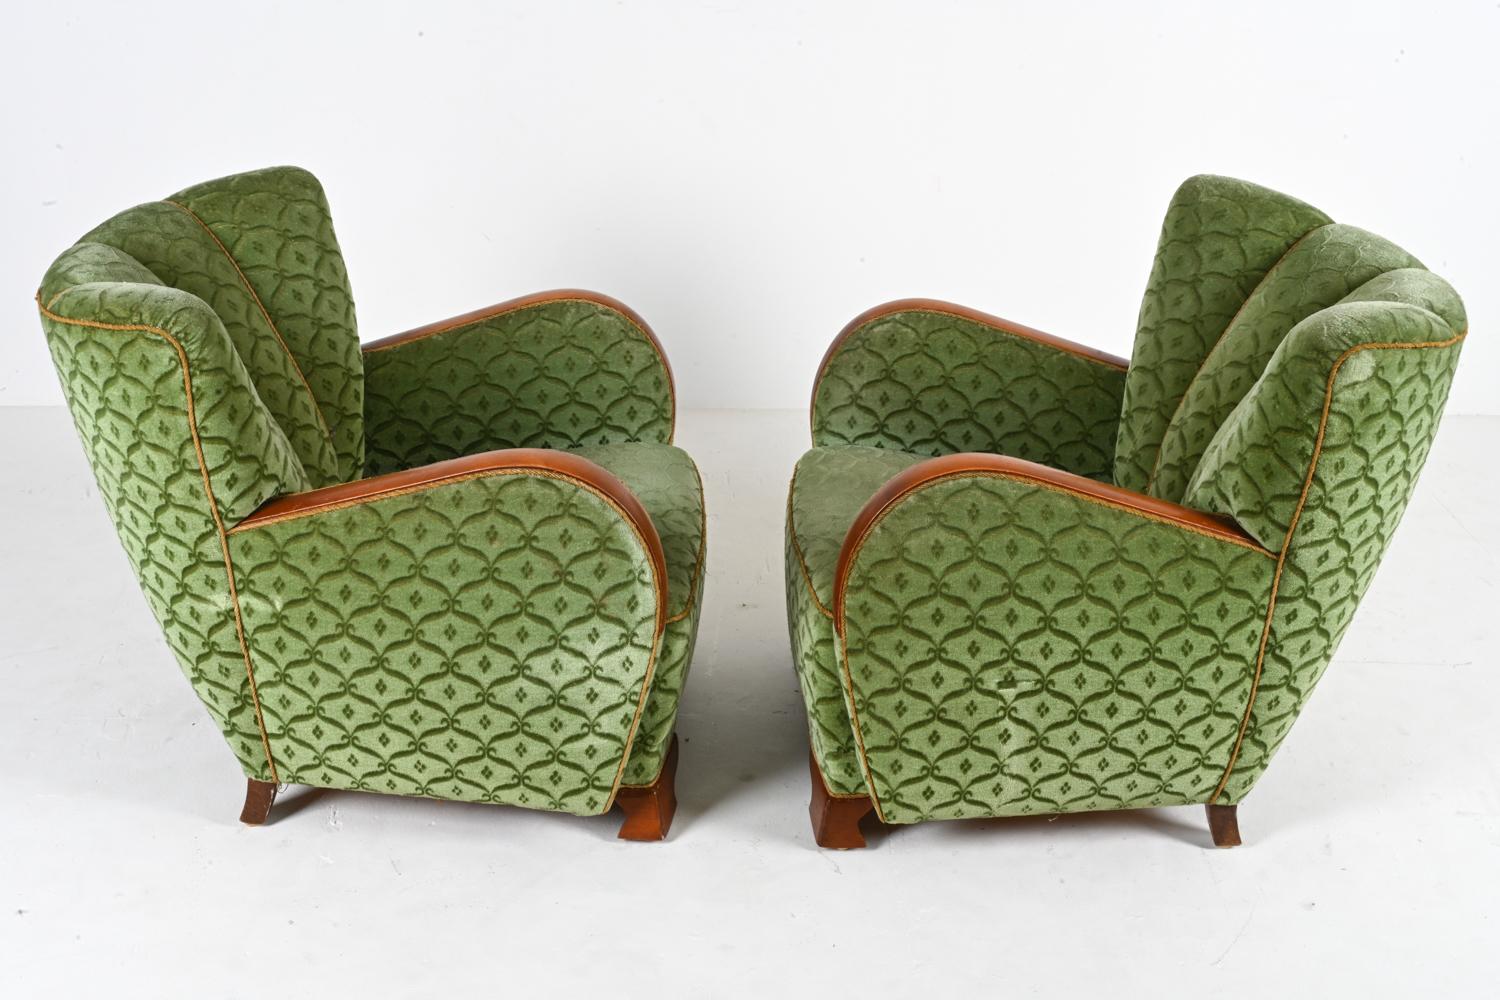 Pair of Mogens Lassen Style Danish Midcentury Lounge or Club Chairs, 1940s For Sale 10